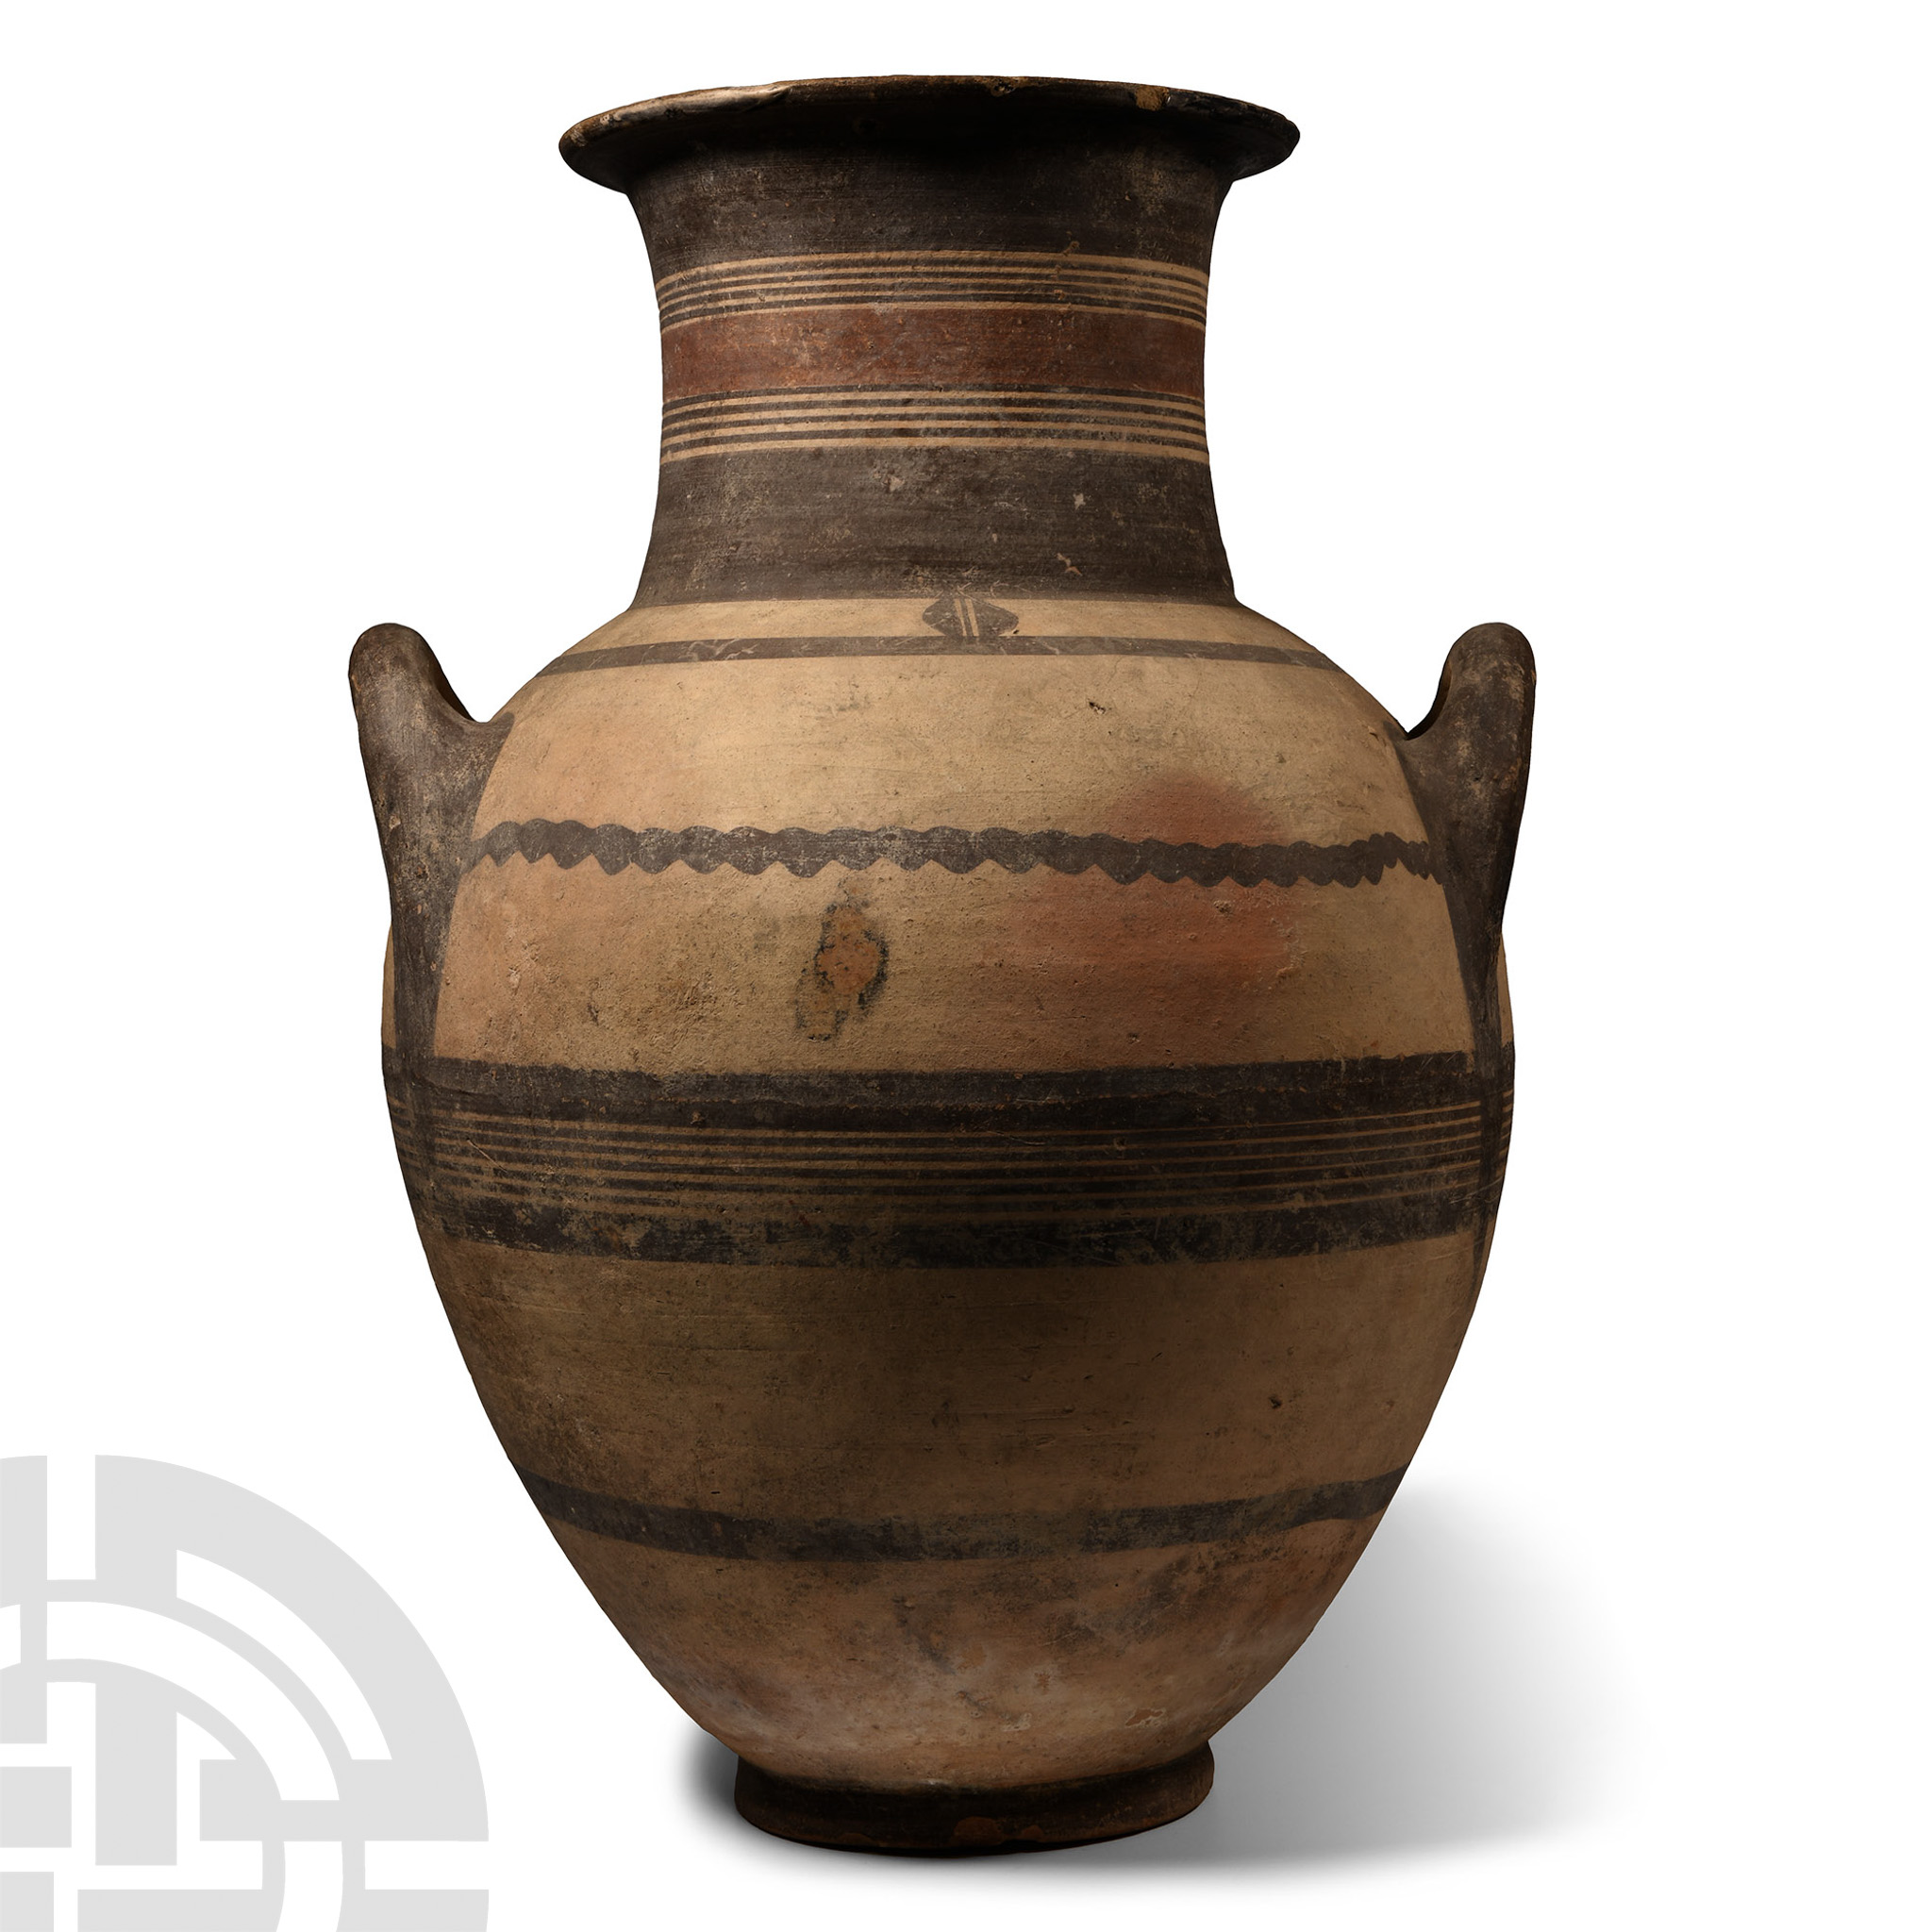 Very Large Cypriot Bichrome Ware Pottery Amphora - Image 2 of 4